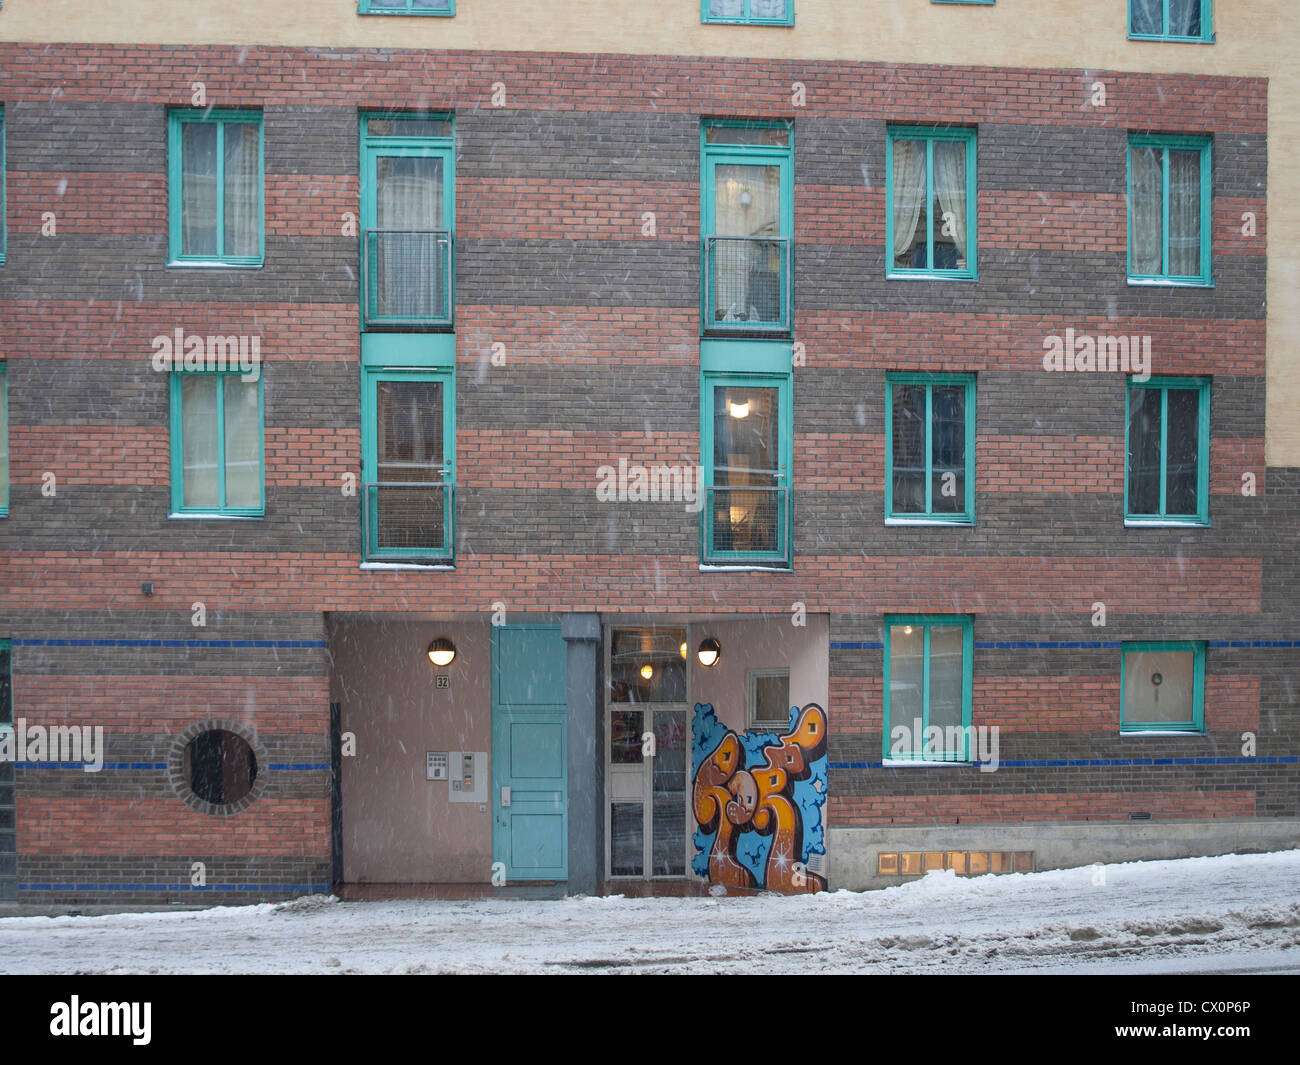 Snowfall in downtown Oslo residential area. Apartment house with colorful details, graffiti and slippery pavement Stock Photo